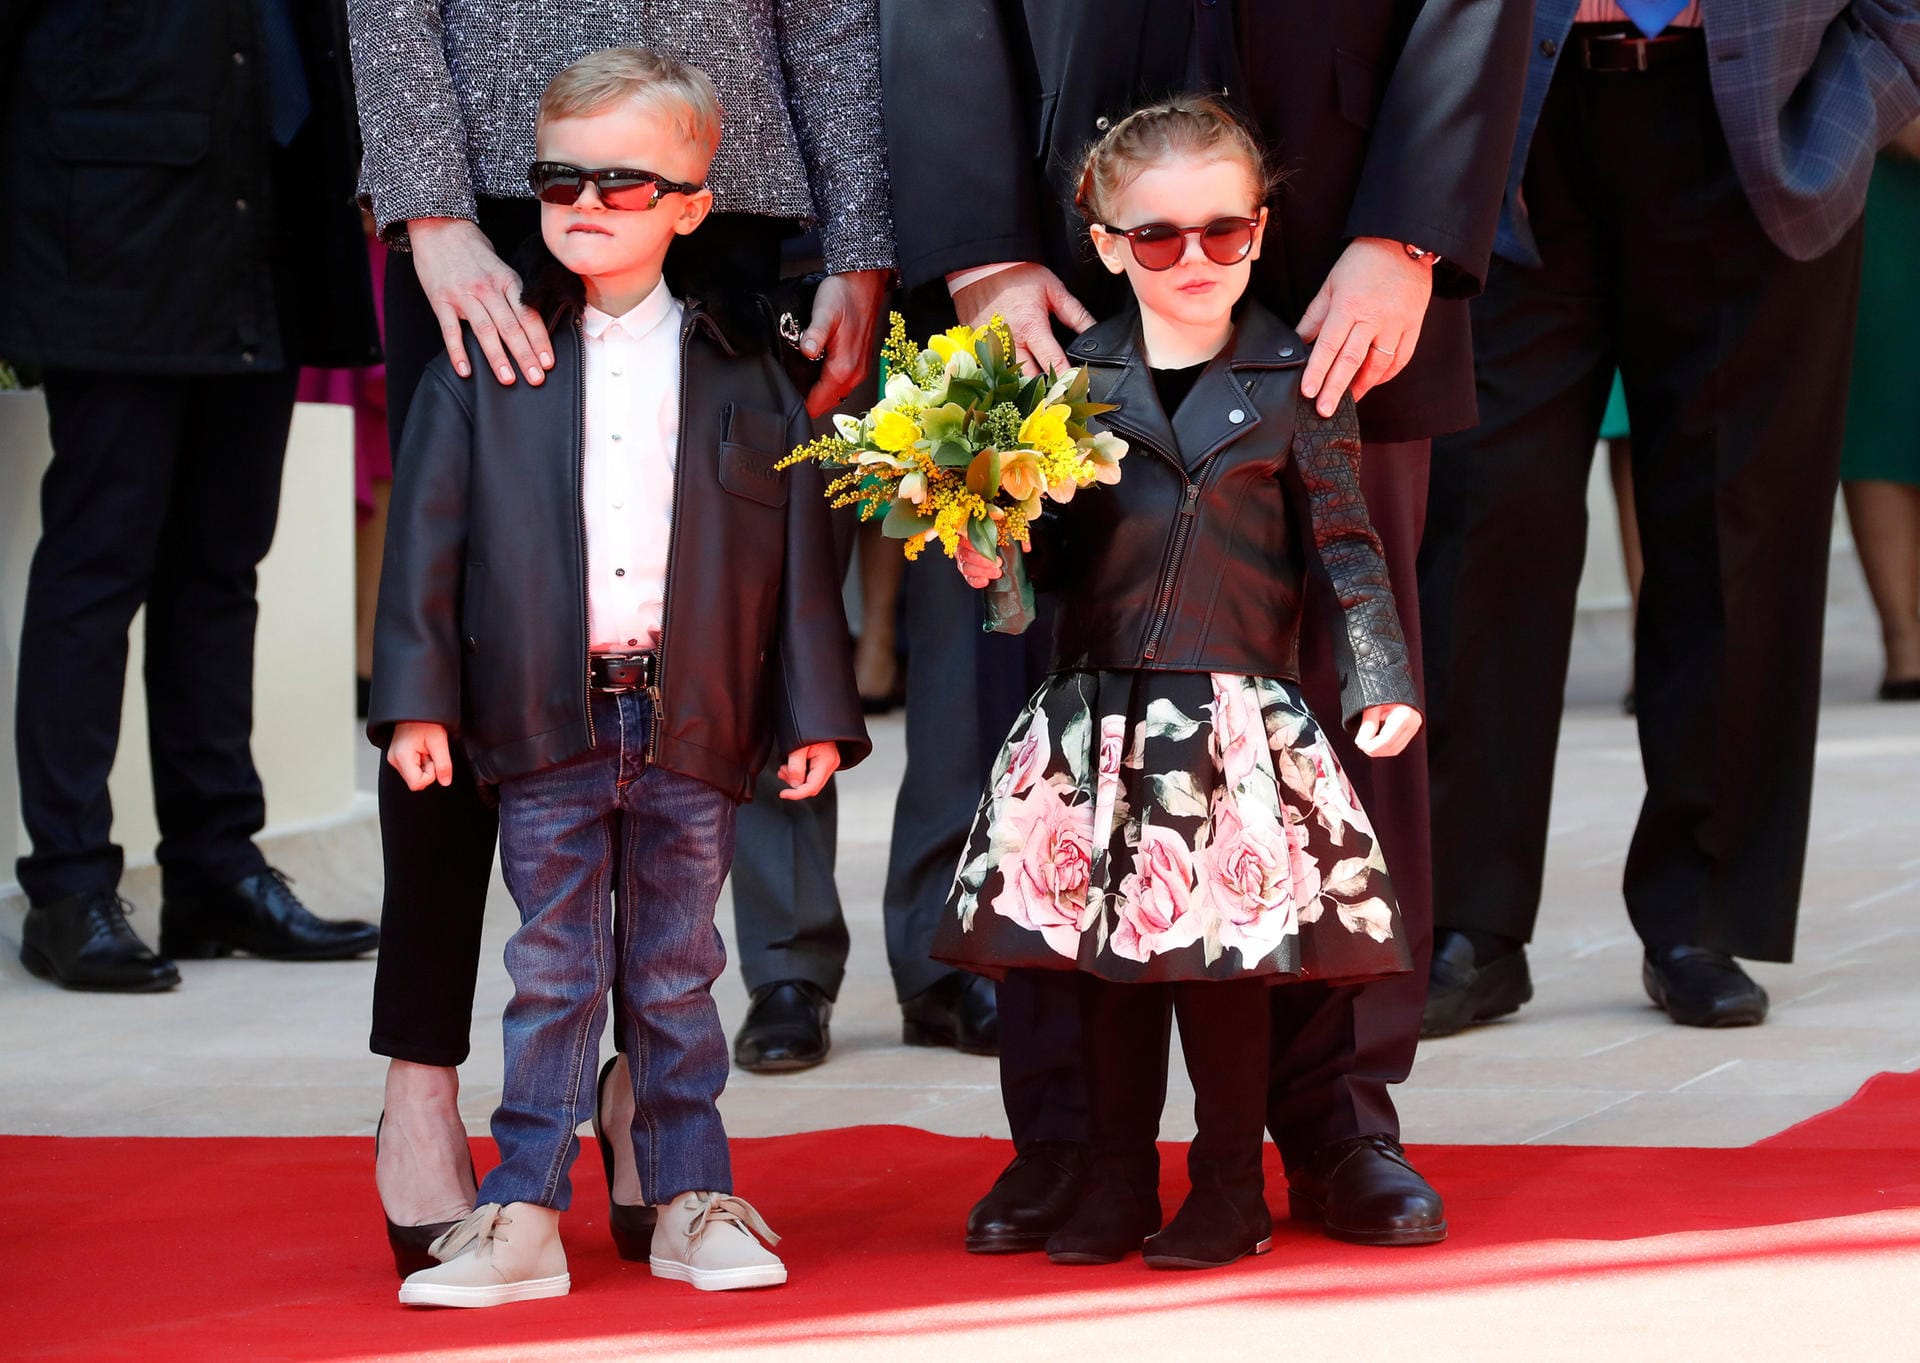 Princess Gabriella and Prince Jacques arrive for the inauguration of the new Luxury complex the "One Monte - Carlo" in Monaco